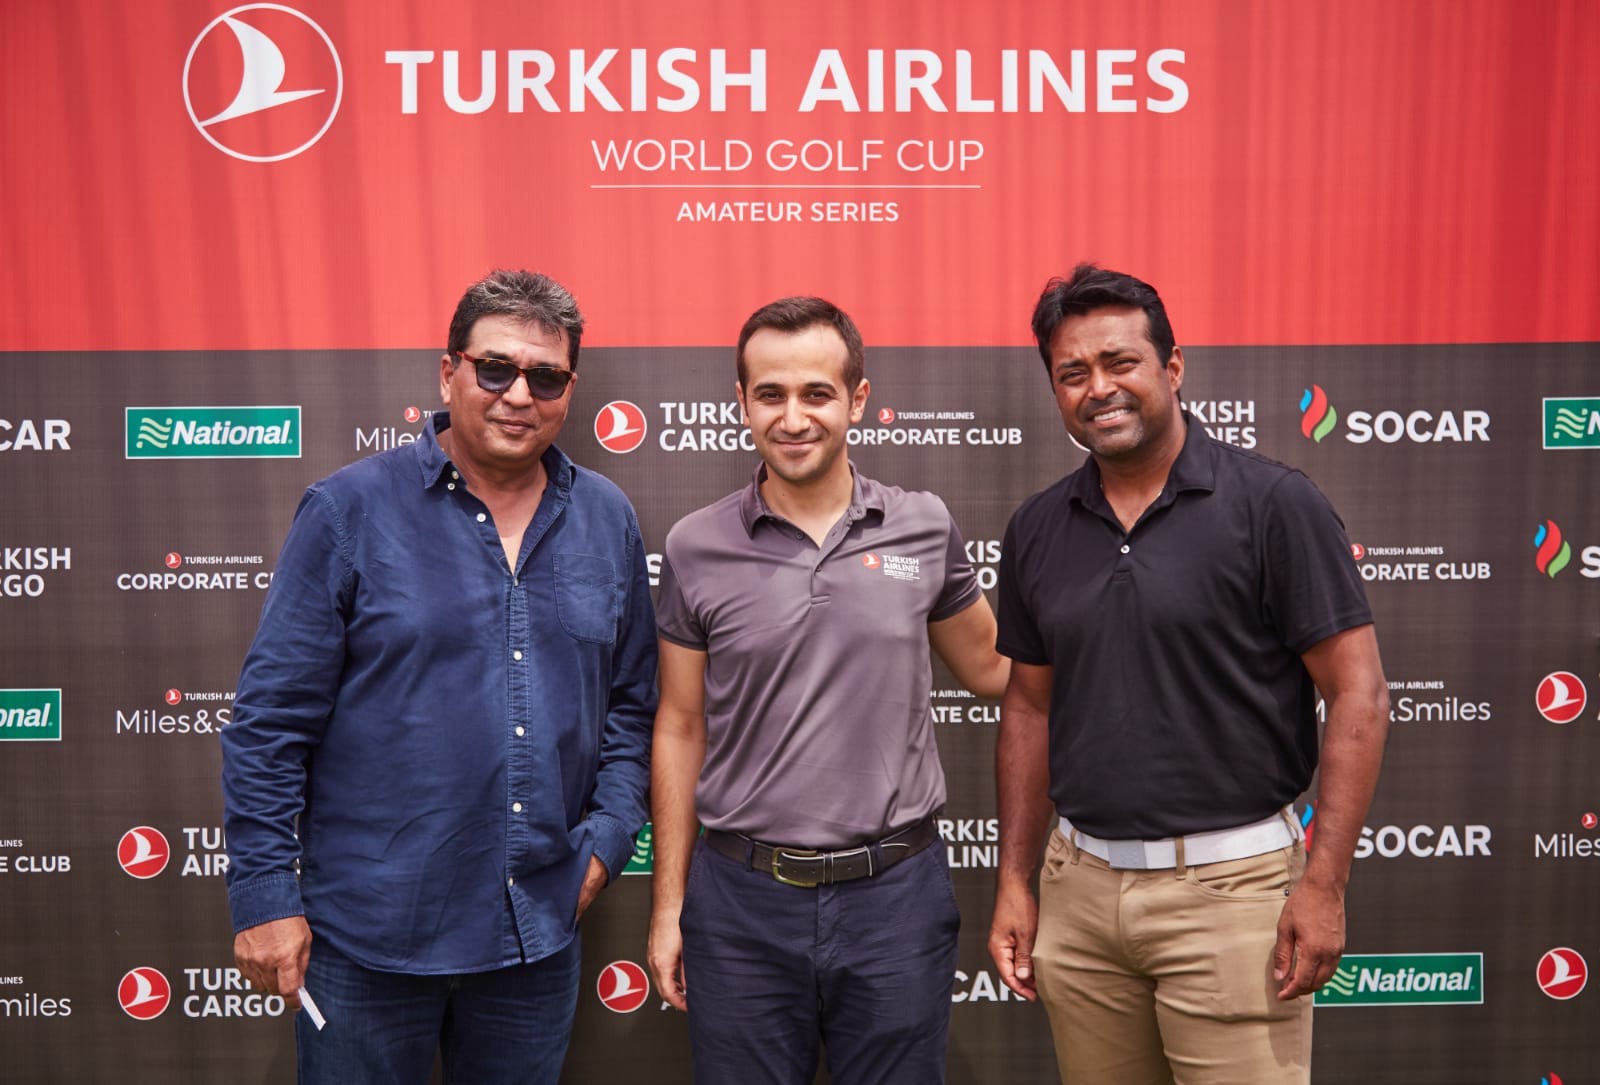 Ibrahim Hakki Guntay, General Manager for Turkish Airlines West and South India (In Center) with Leander Paes, Indian Tennis Player - Photo By Sachin Murdeshwar GPN